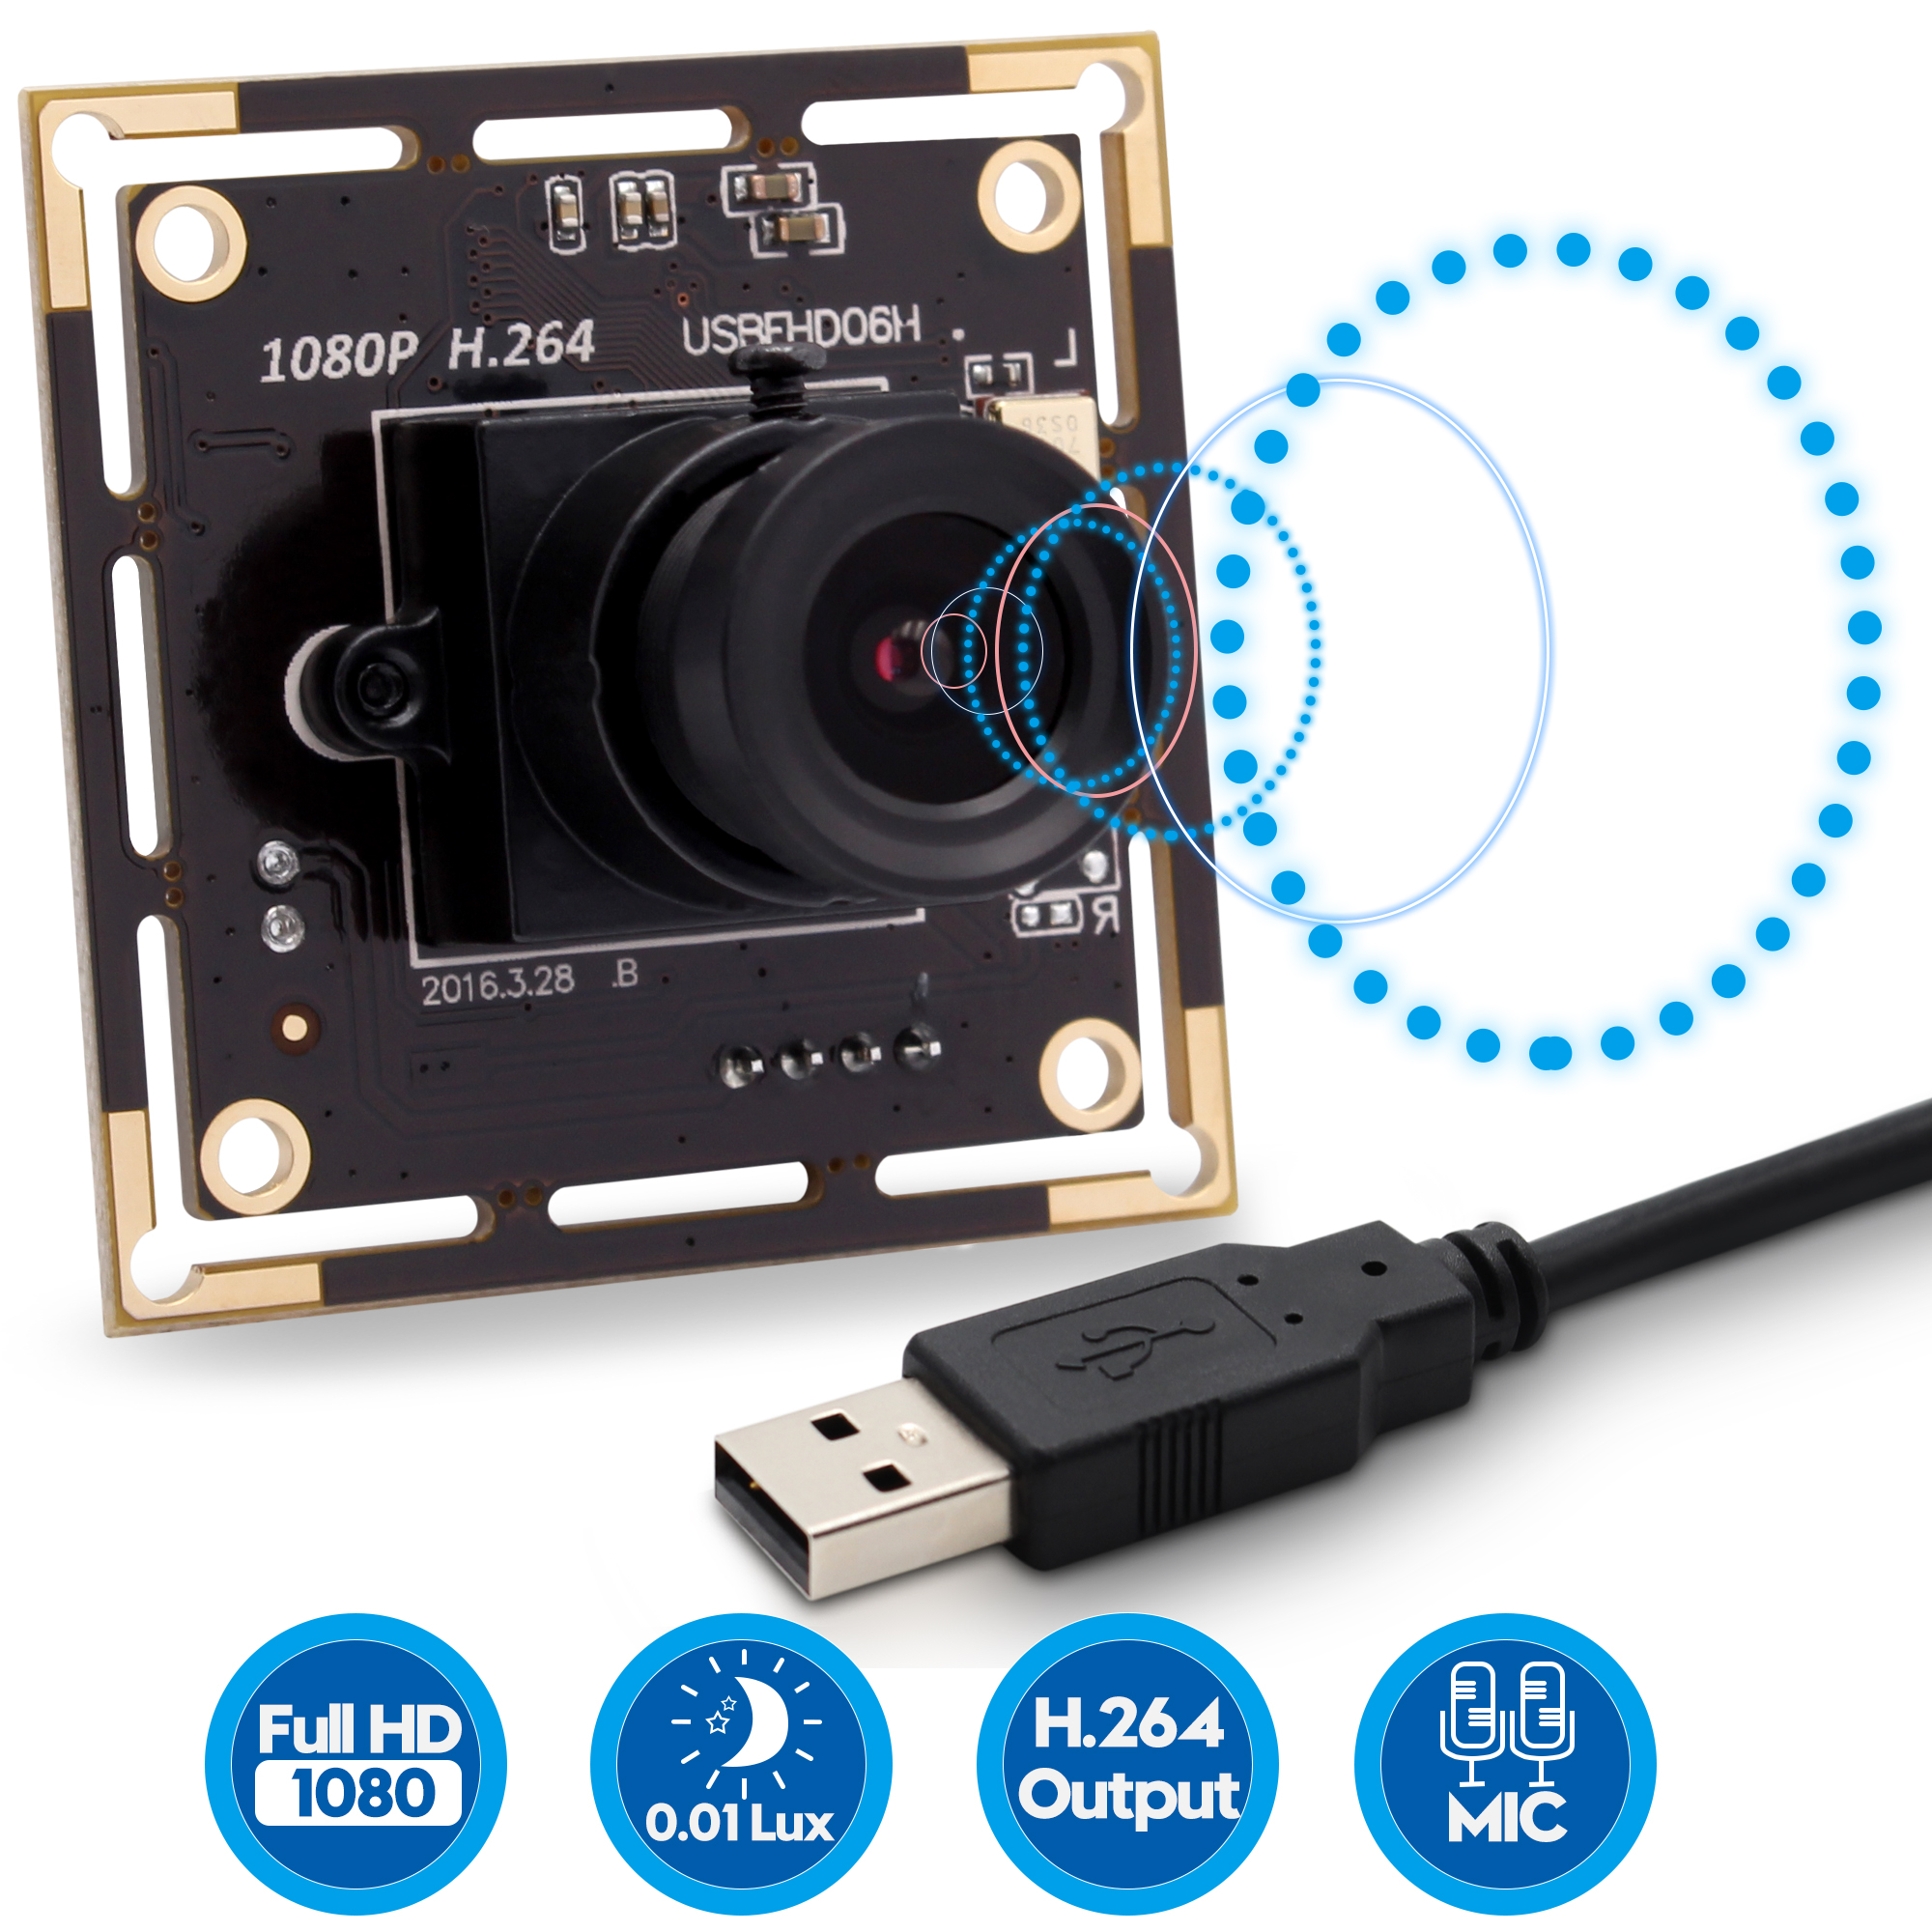 ELP 2MP 1080P USB Camera Module with Sony IMX323 Webcam,H.264 and 0.01LUX Low Illumination USB Camera for Industrial Webcam,High Speed USB 2.0 USB Camera with 3.6mm Lens for Android Mac-OS Windows